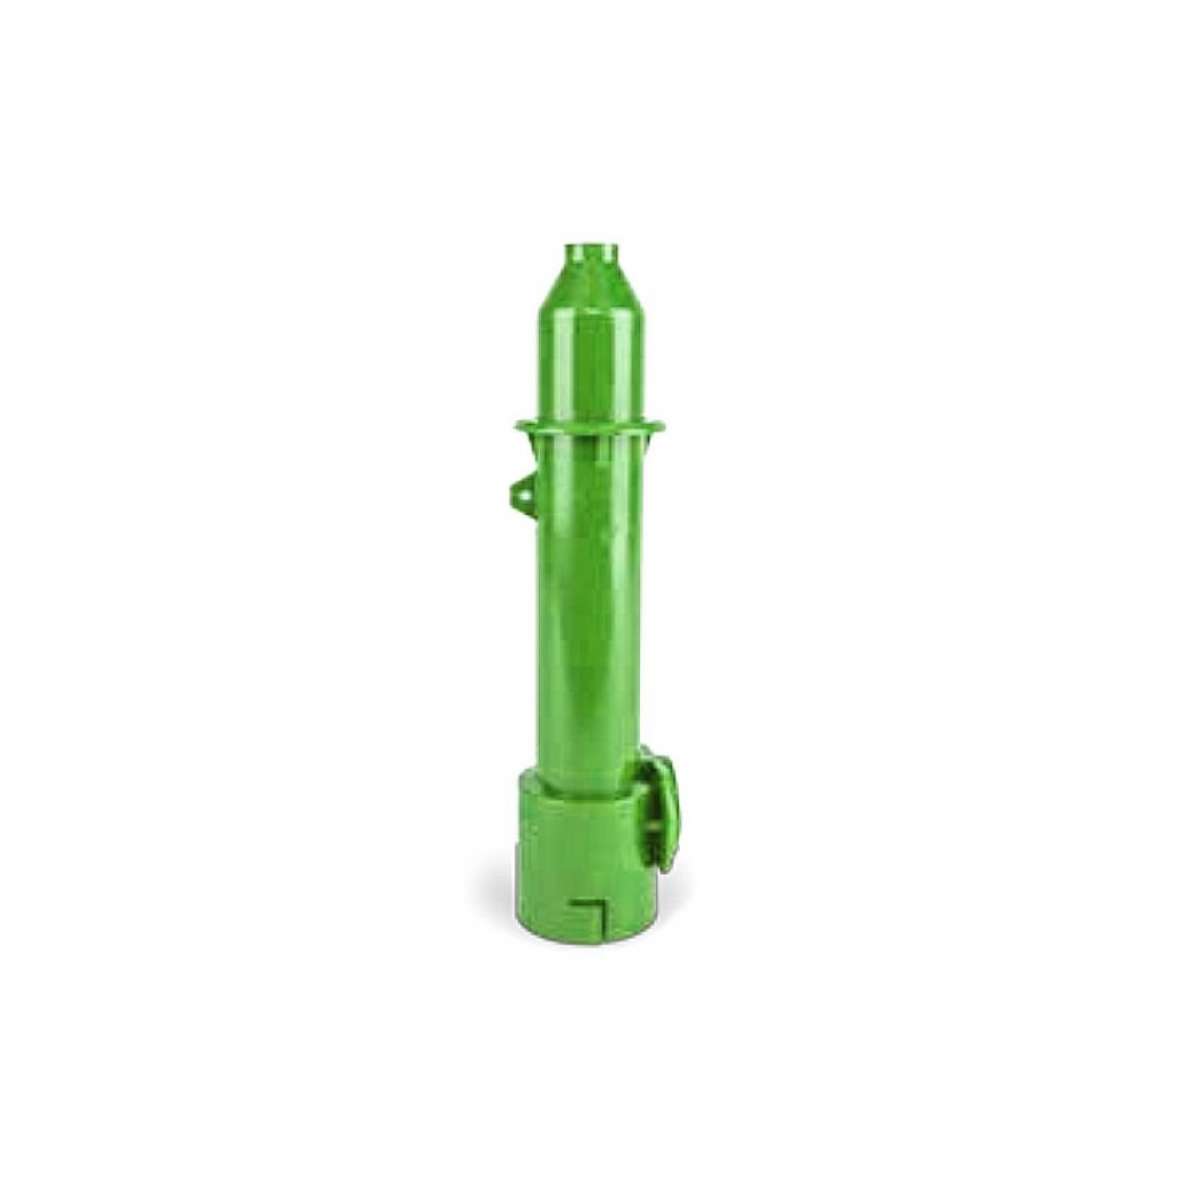 IsoLink 8" Rigid Spout with 1/2" Tip - Light Green